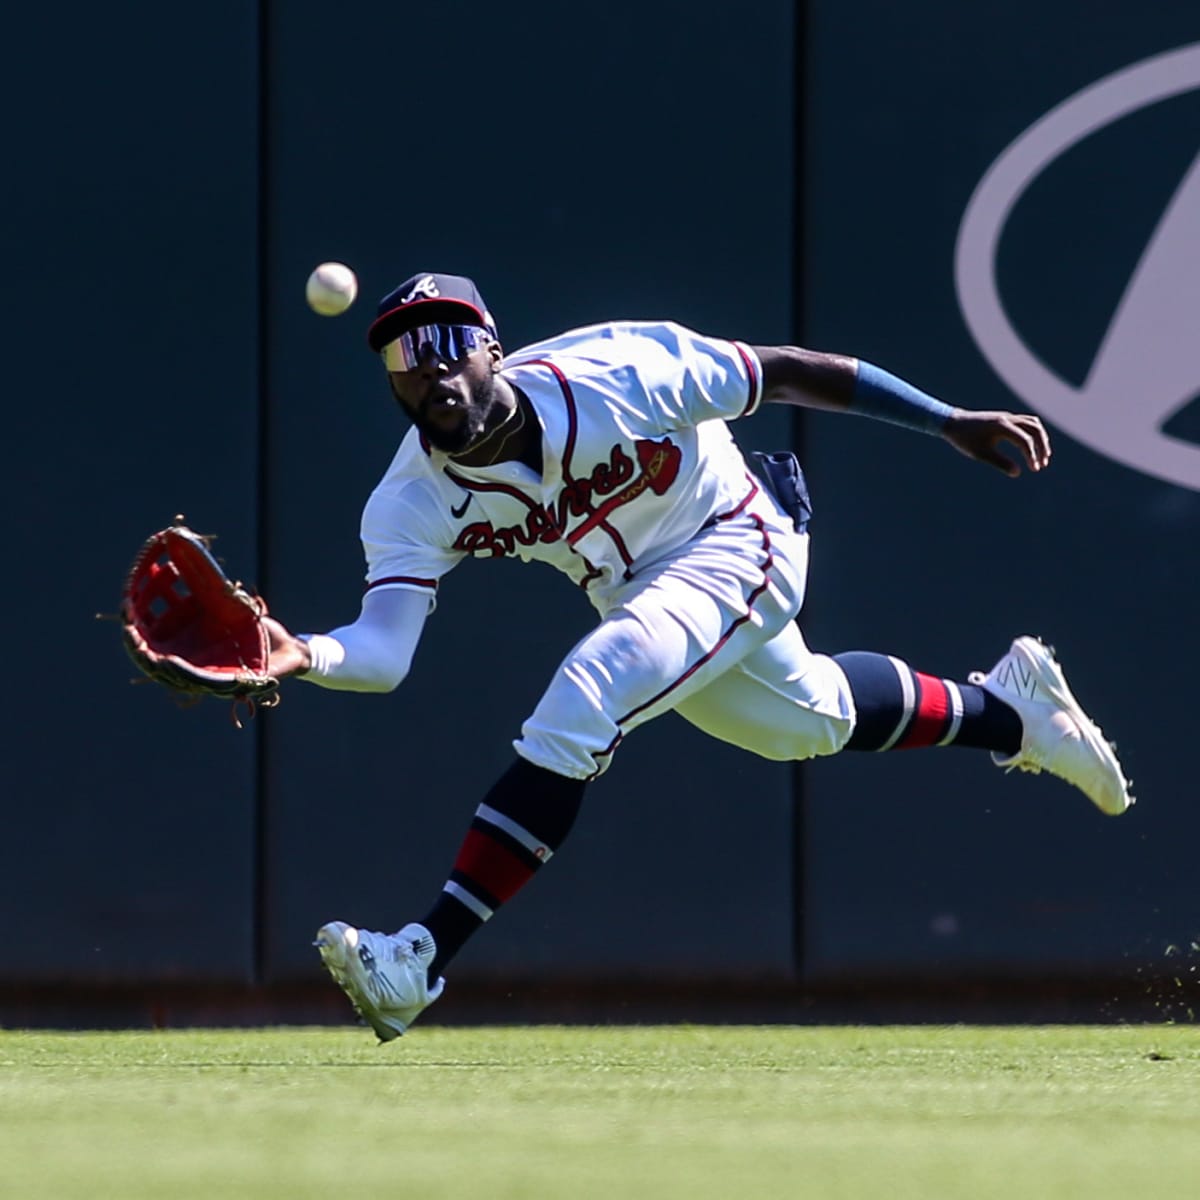 OptaSTATS] Michael Harris II of the Braves is the first outfielder